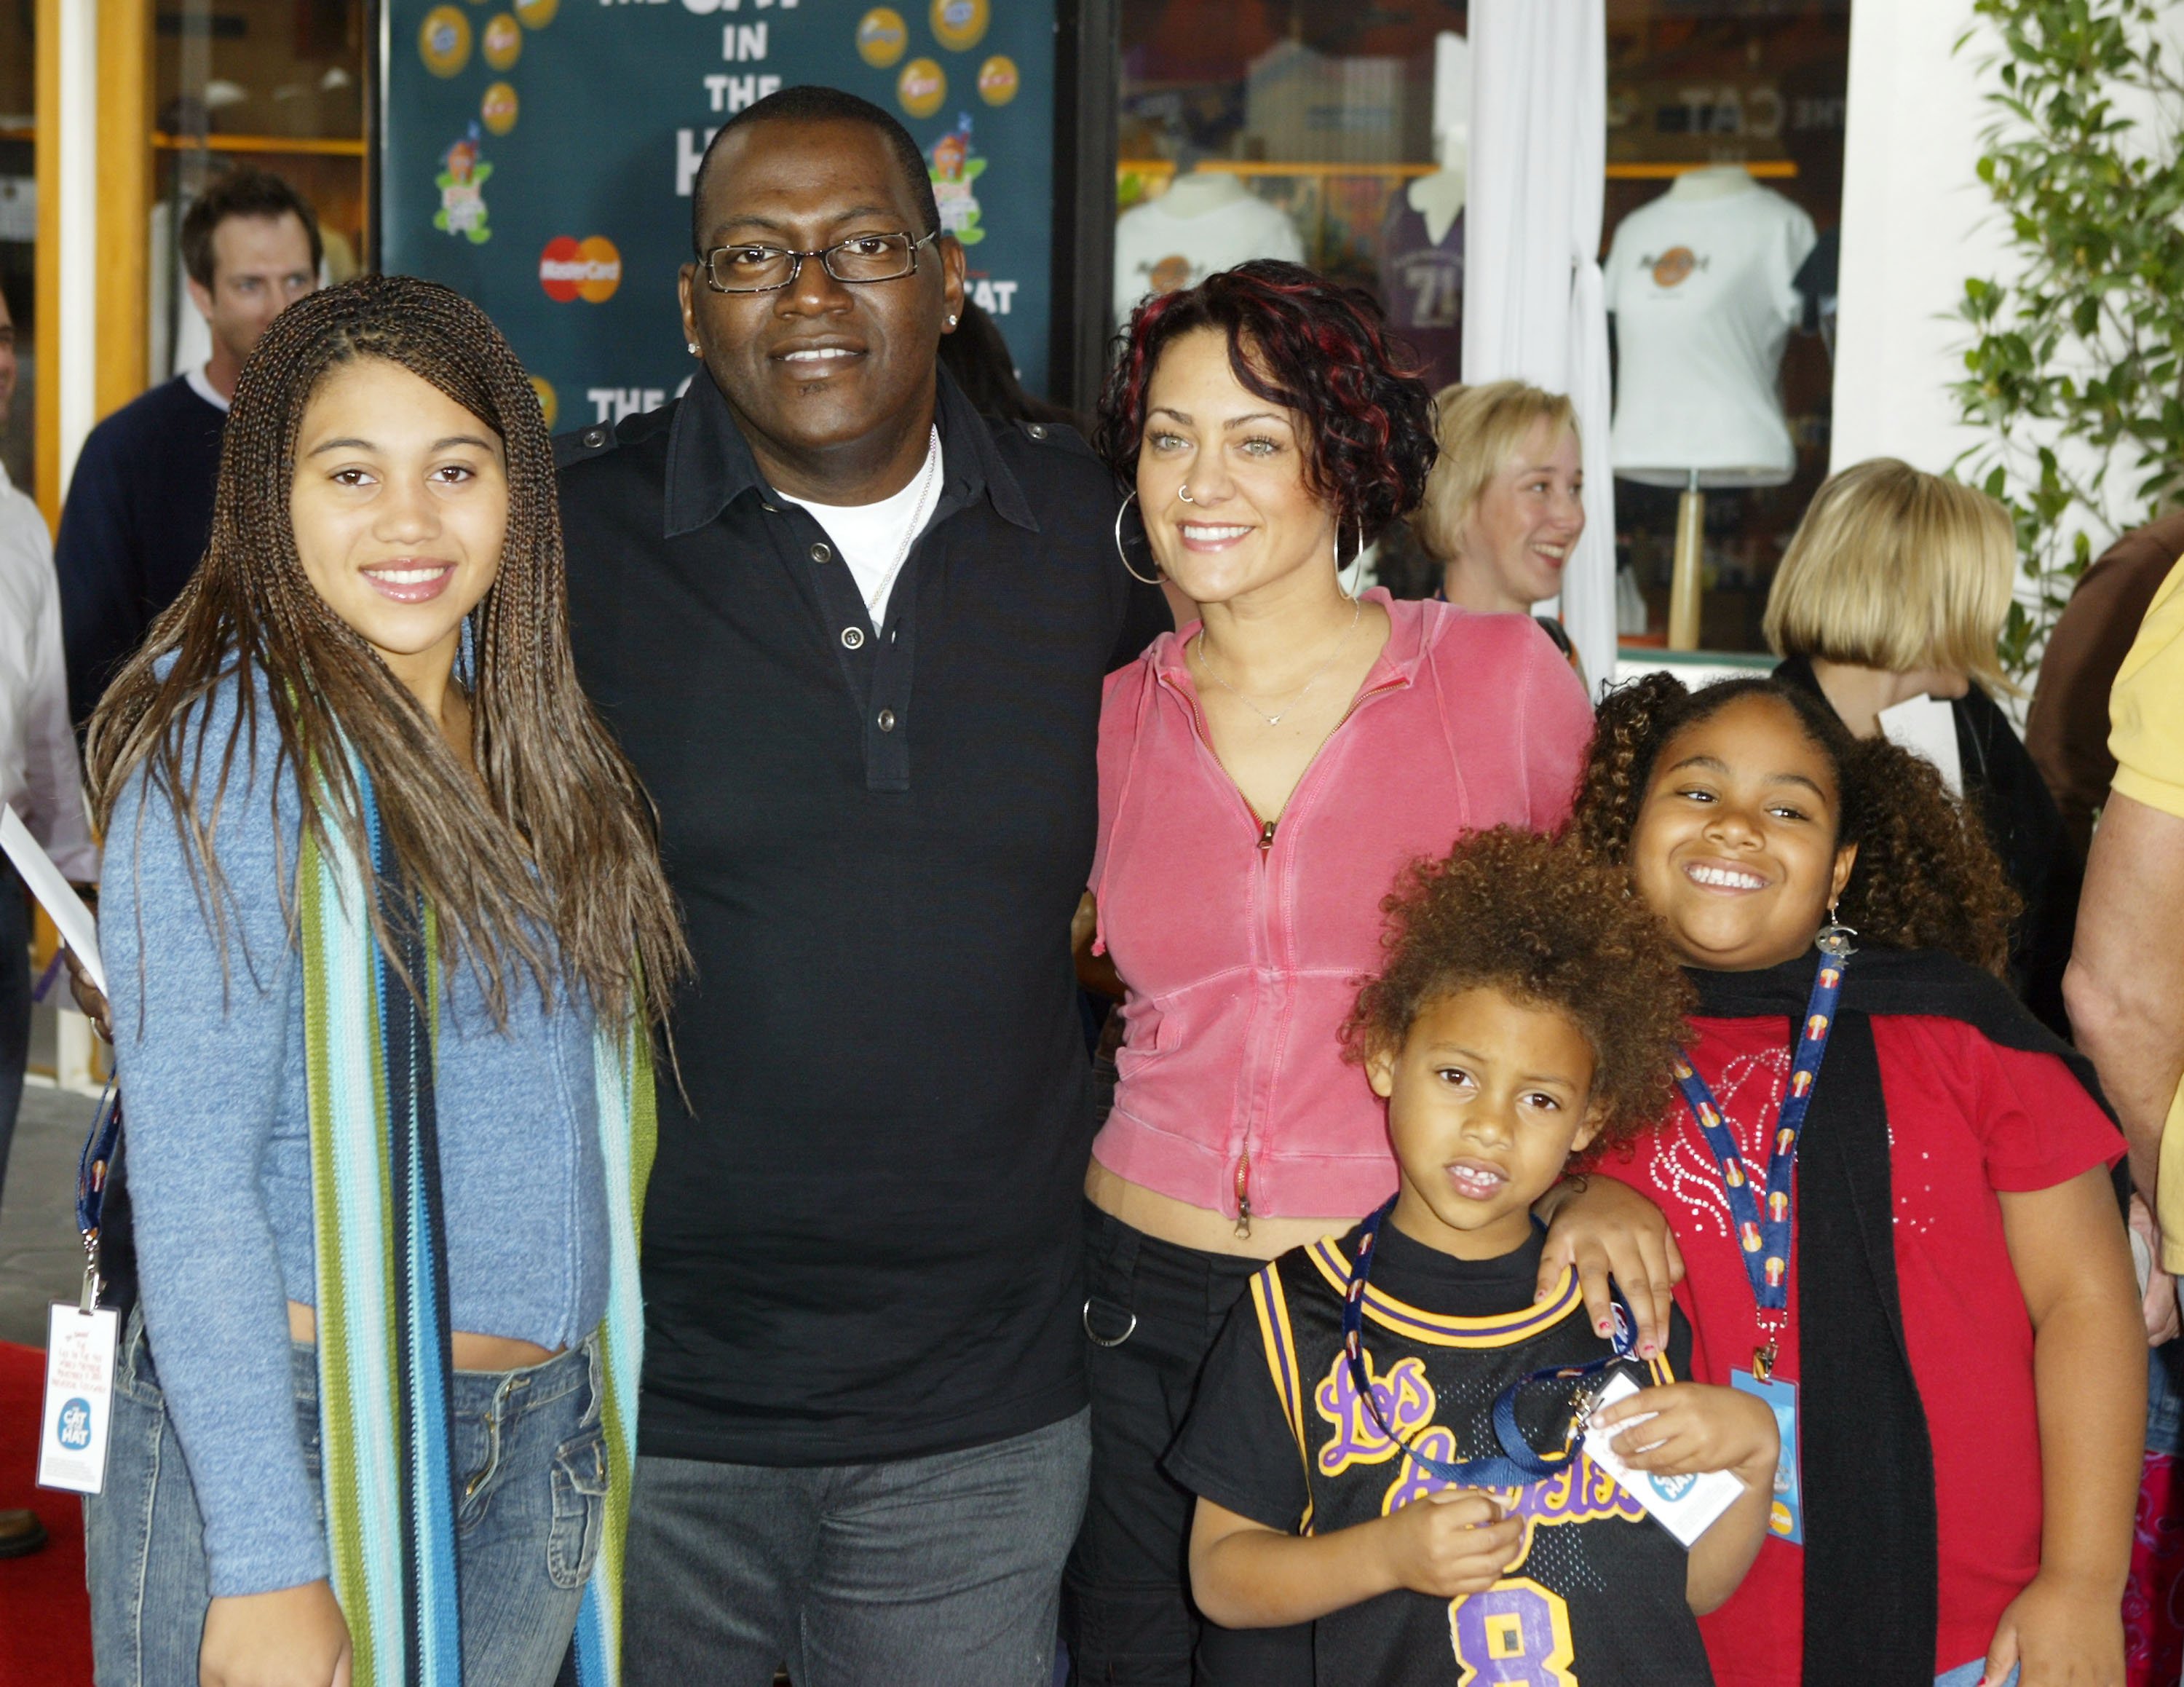 Randy Jackson and his family attending the world premiere of "Dr. Seuss' The Cat in the Hat" at Universal Studios on November 8, 2003 in Hollywood, California. | Source: Getty Images